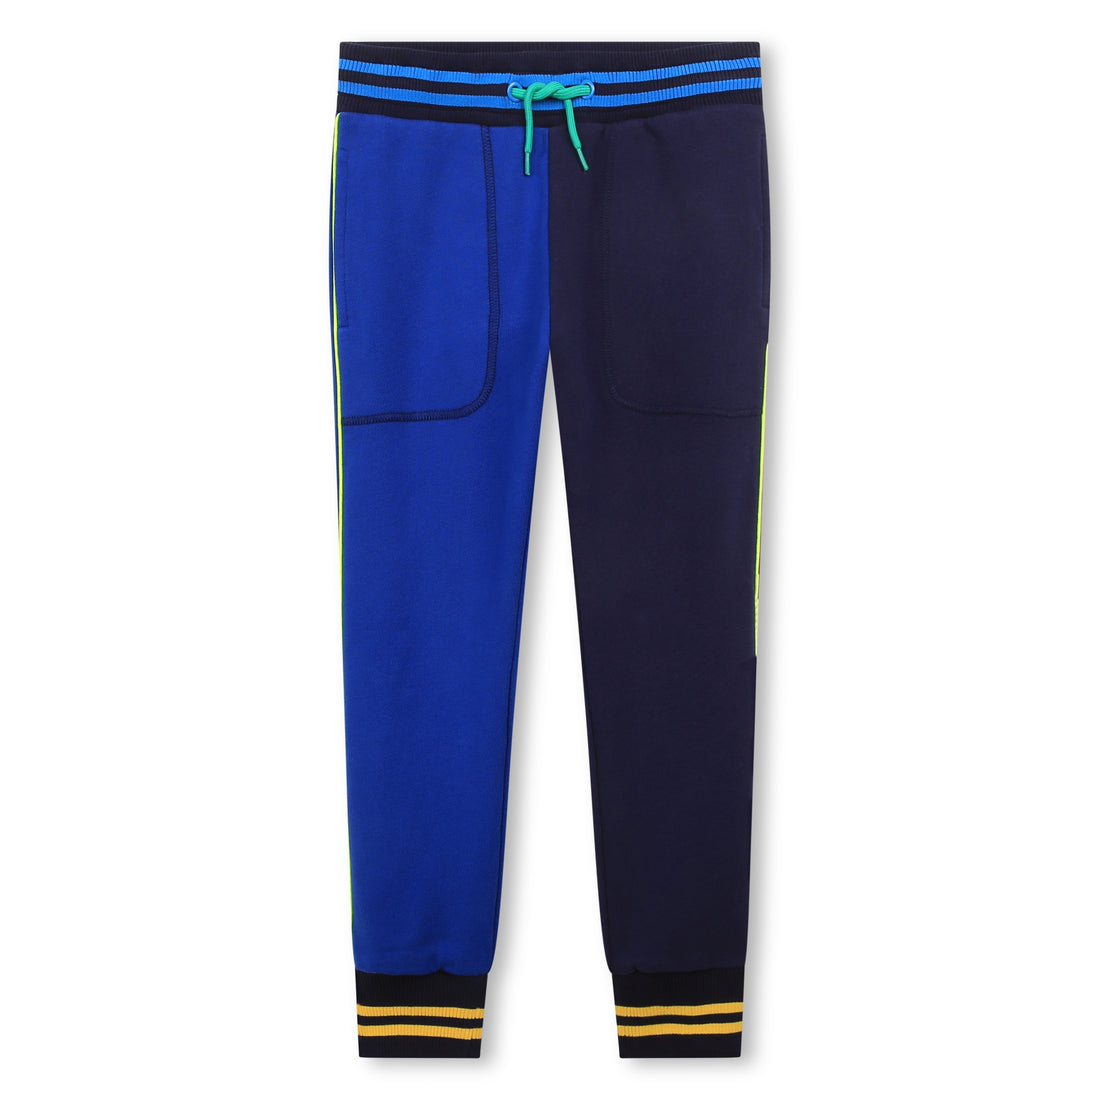 The Marc Jacobs Jogging Bottoms Style: W24291